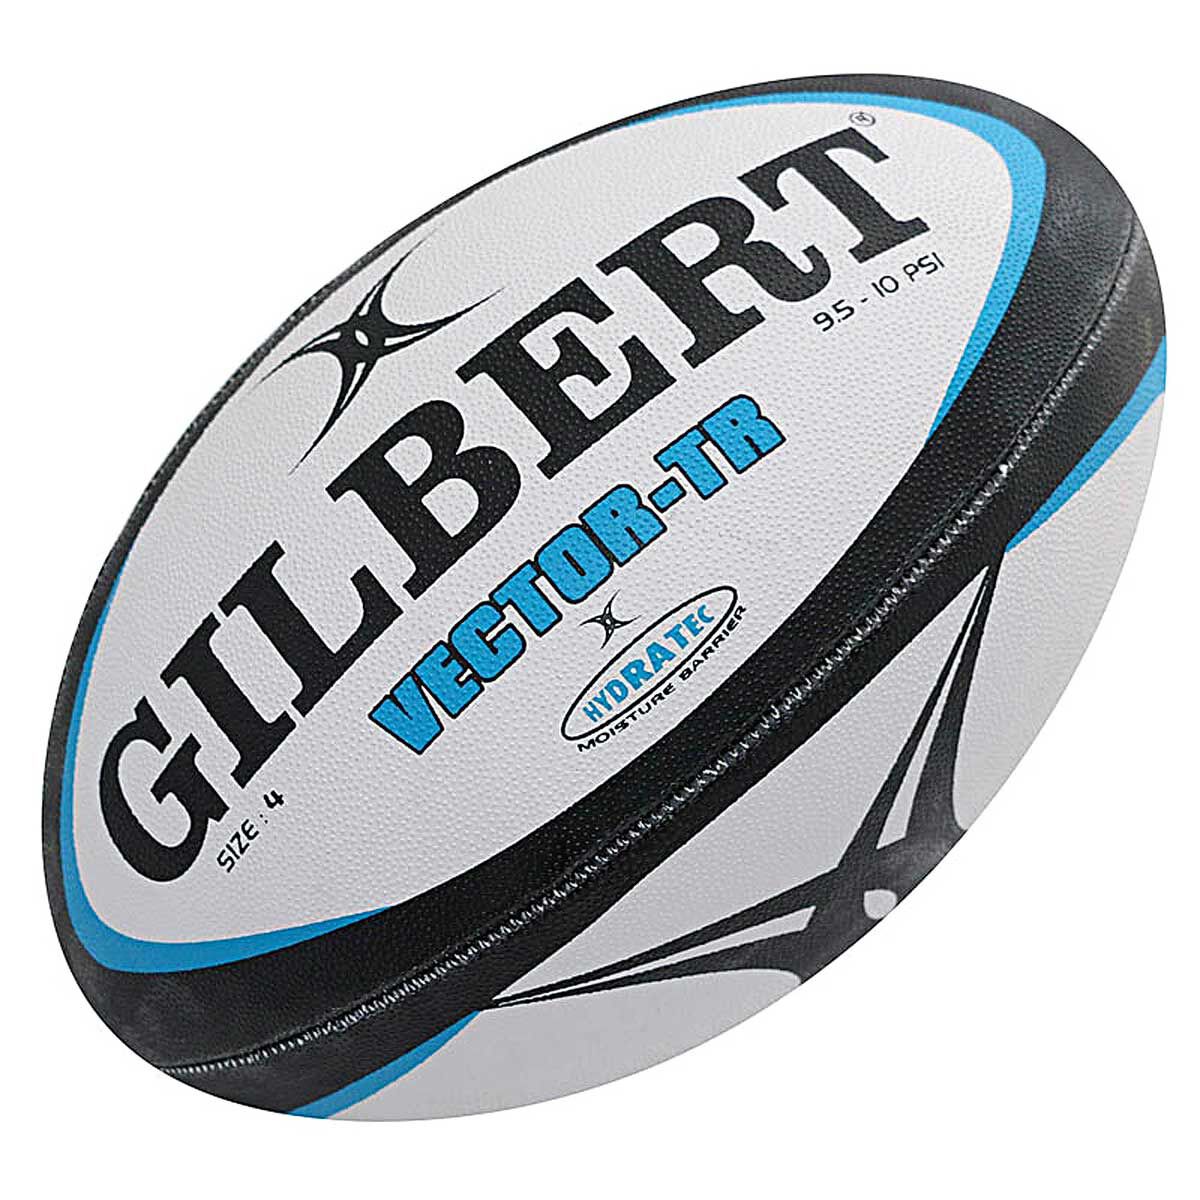 Gilbert Dimension Rugby Union Match Ball Size 05 From Rebel Sport for sale online 